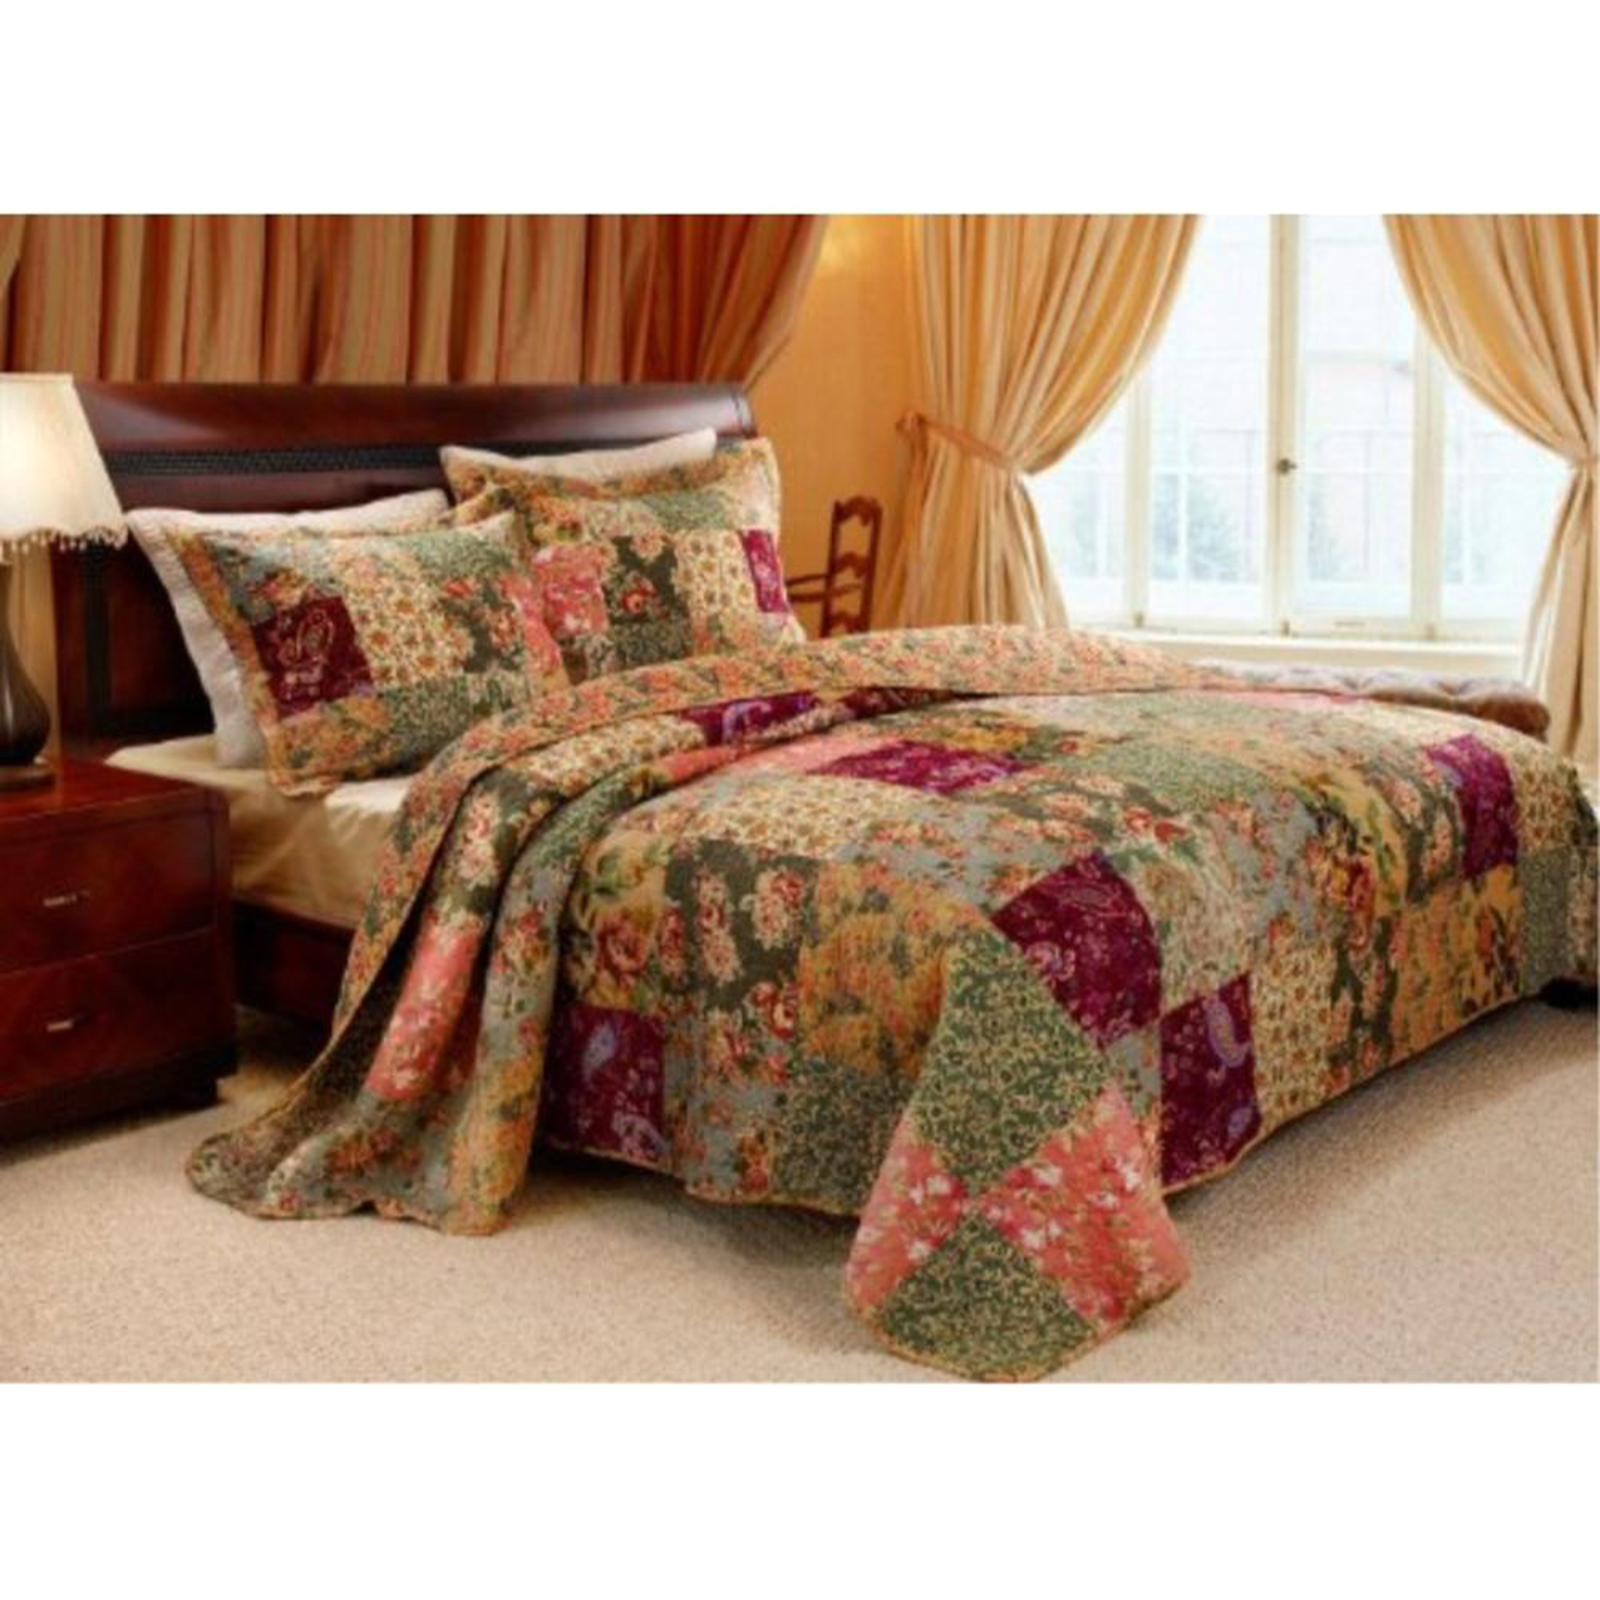 Greenland Home 3pc. King Bedspread Set - Antique Chic